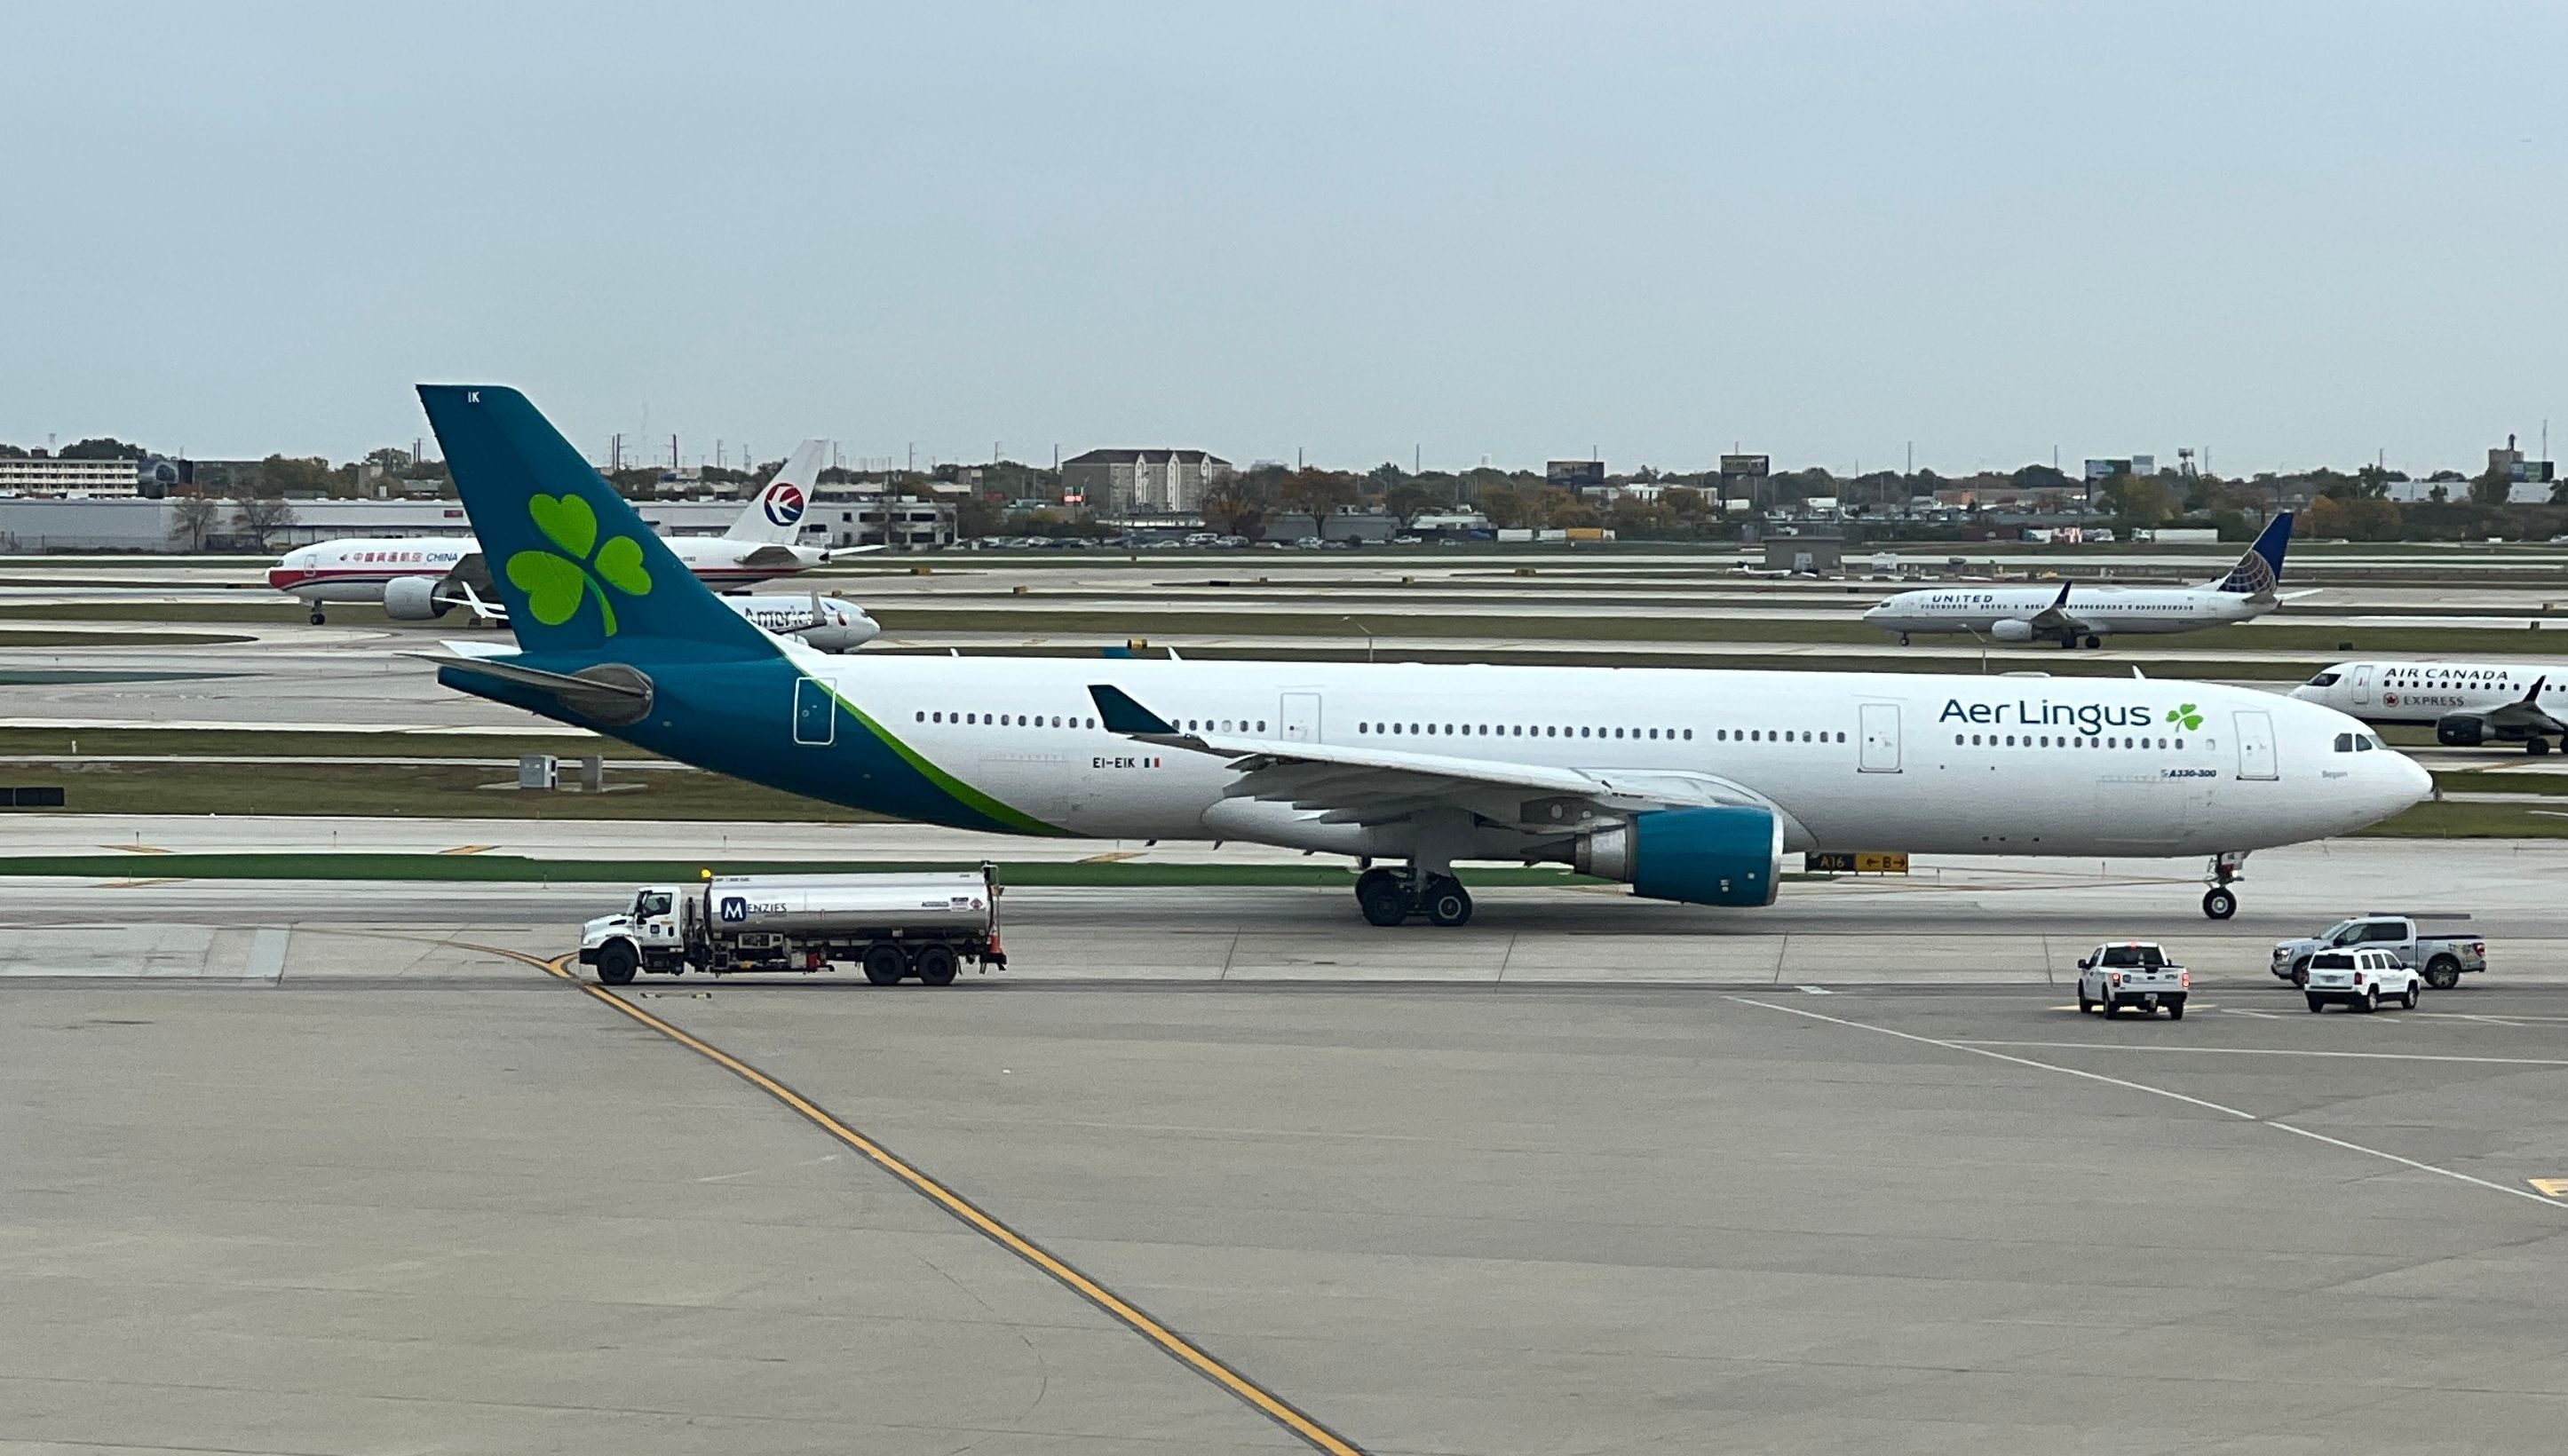 Aer Lingus Airbus A330 at Chicago O'Hare International Airport.